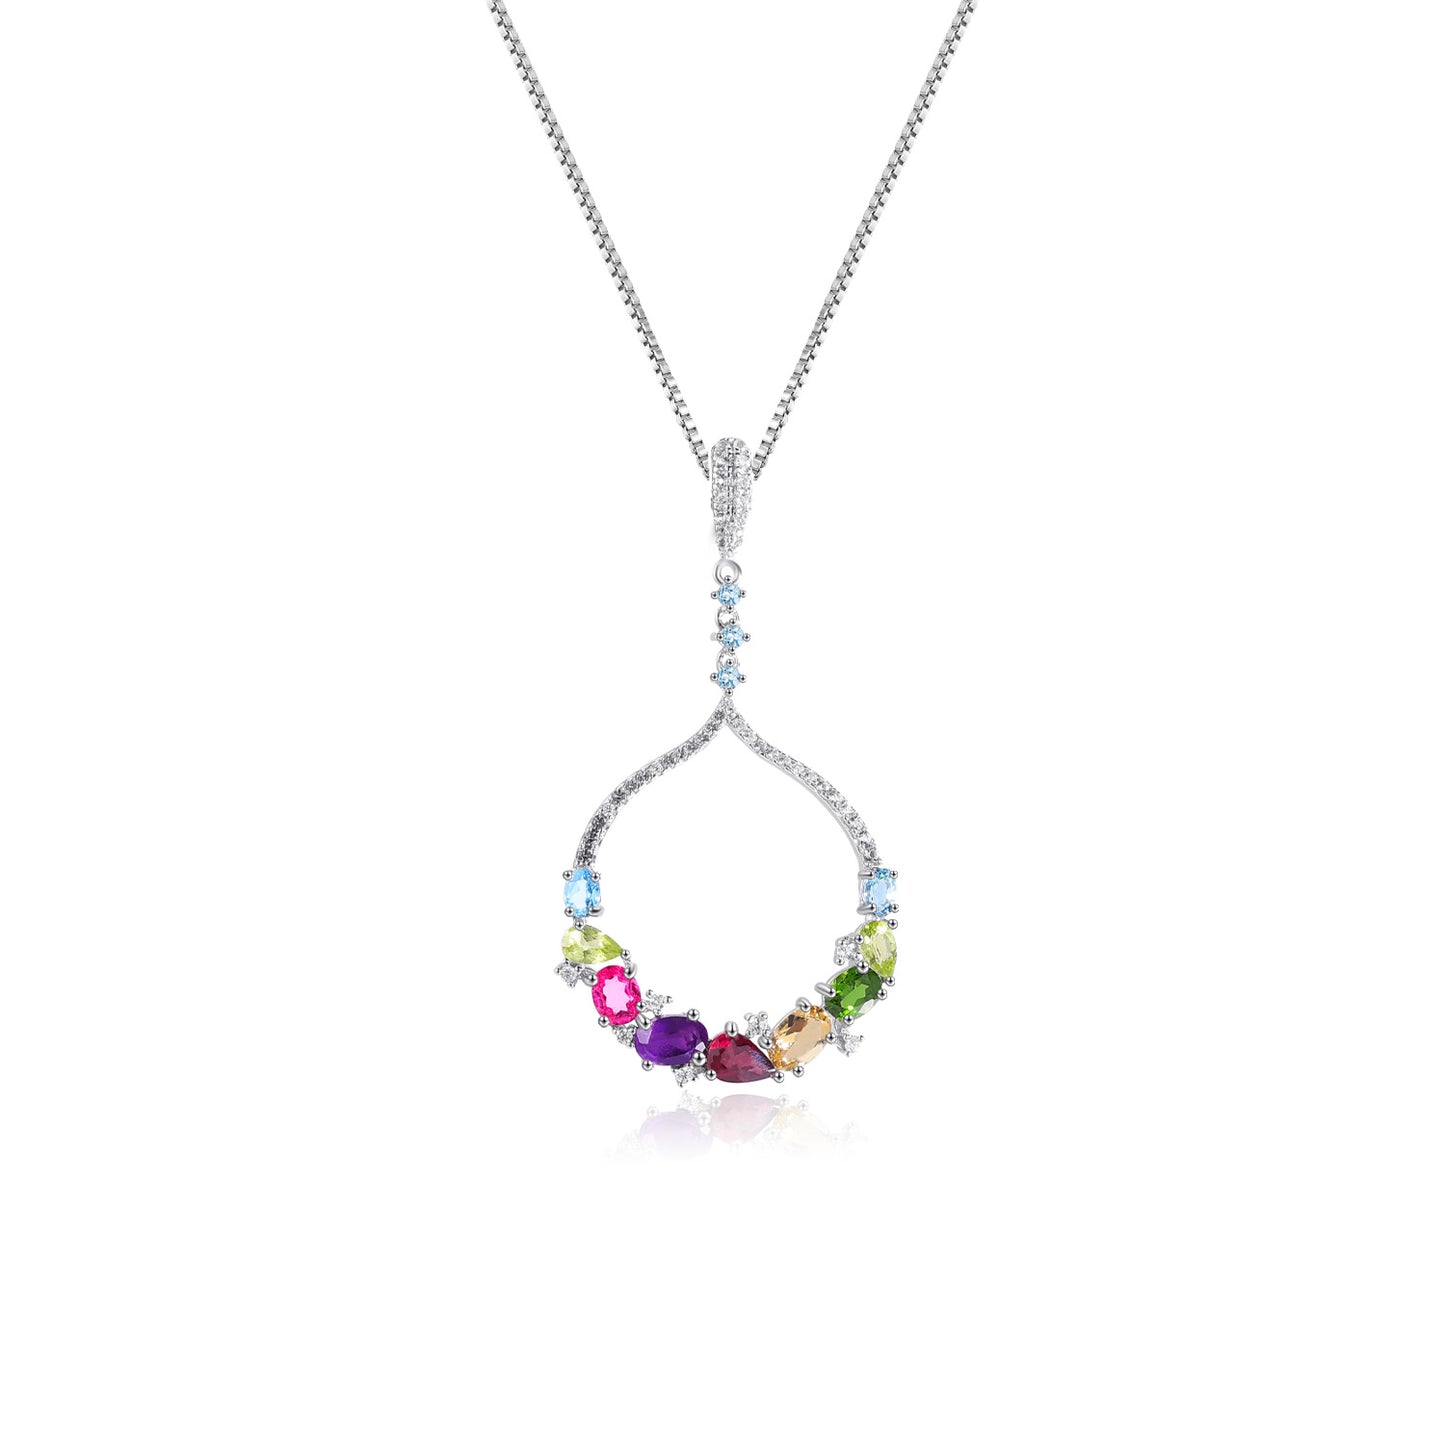 New Fashion Birthday Gift Natural Colourful Gemstones Circle Pendant Sterling Silver Necklace for Women